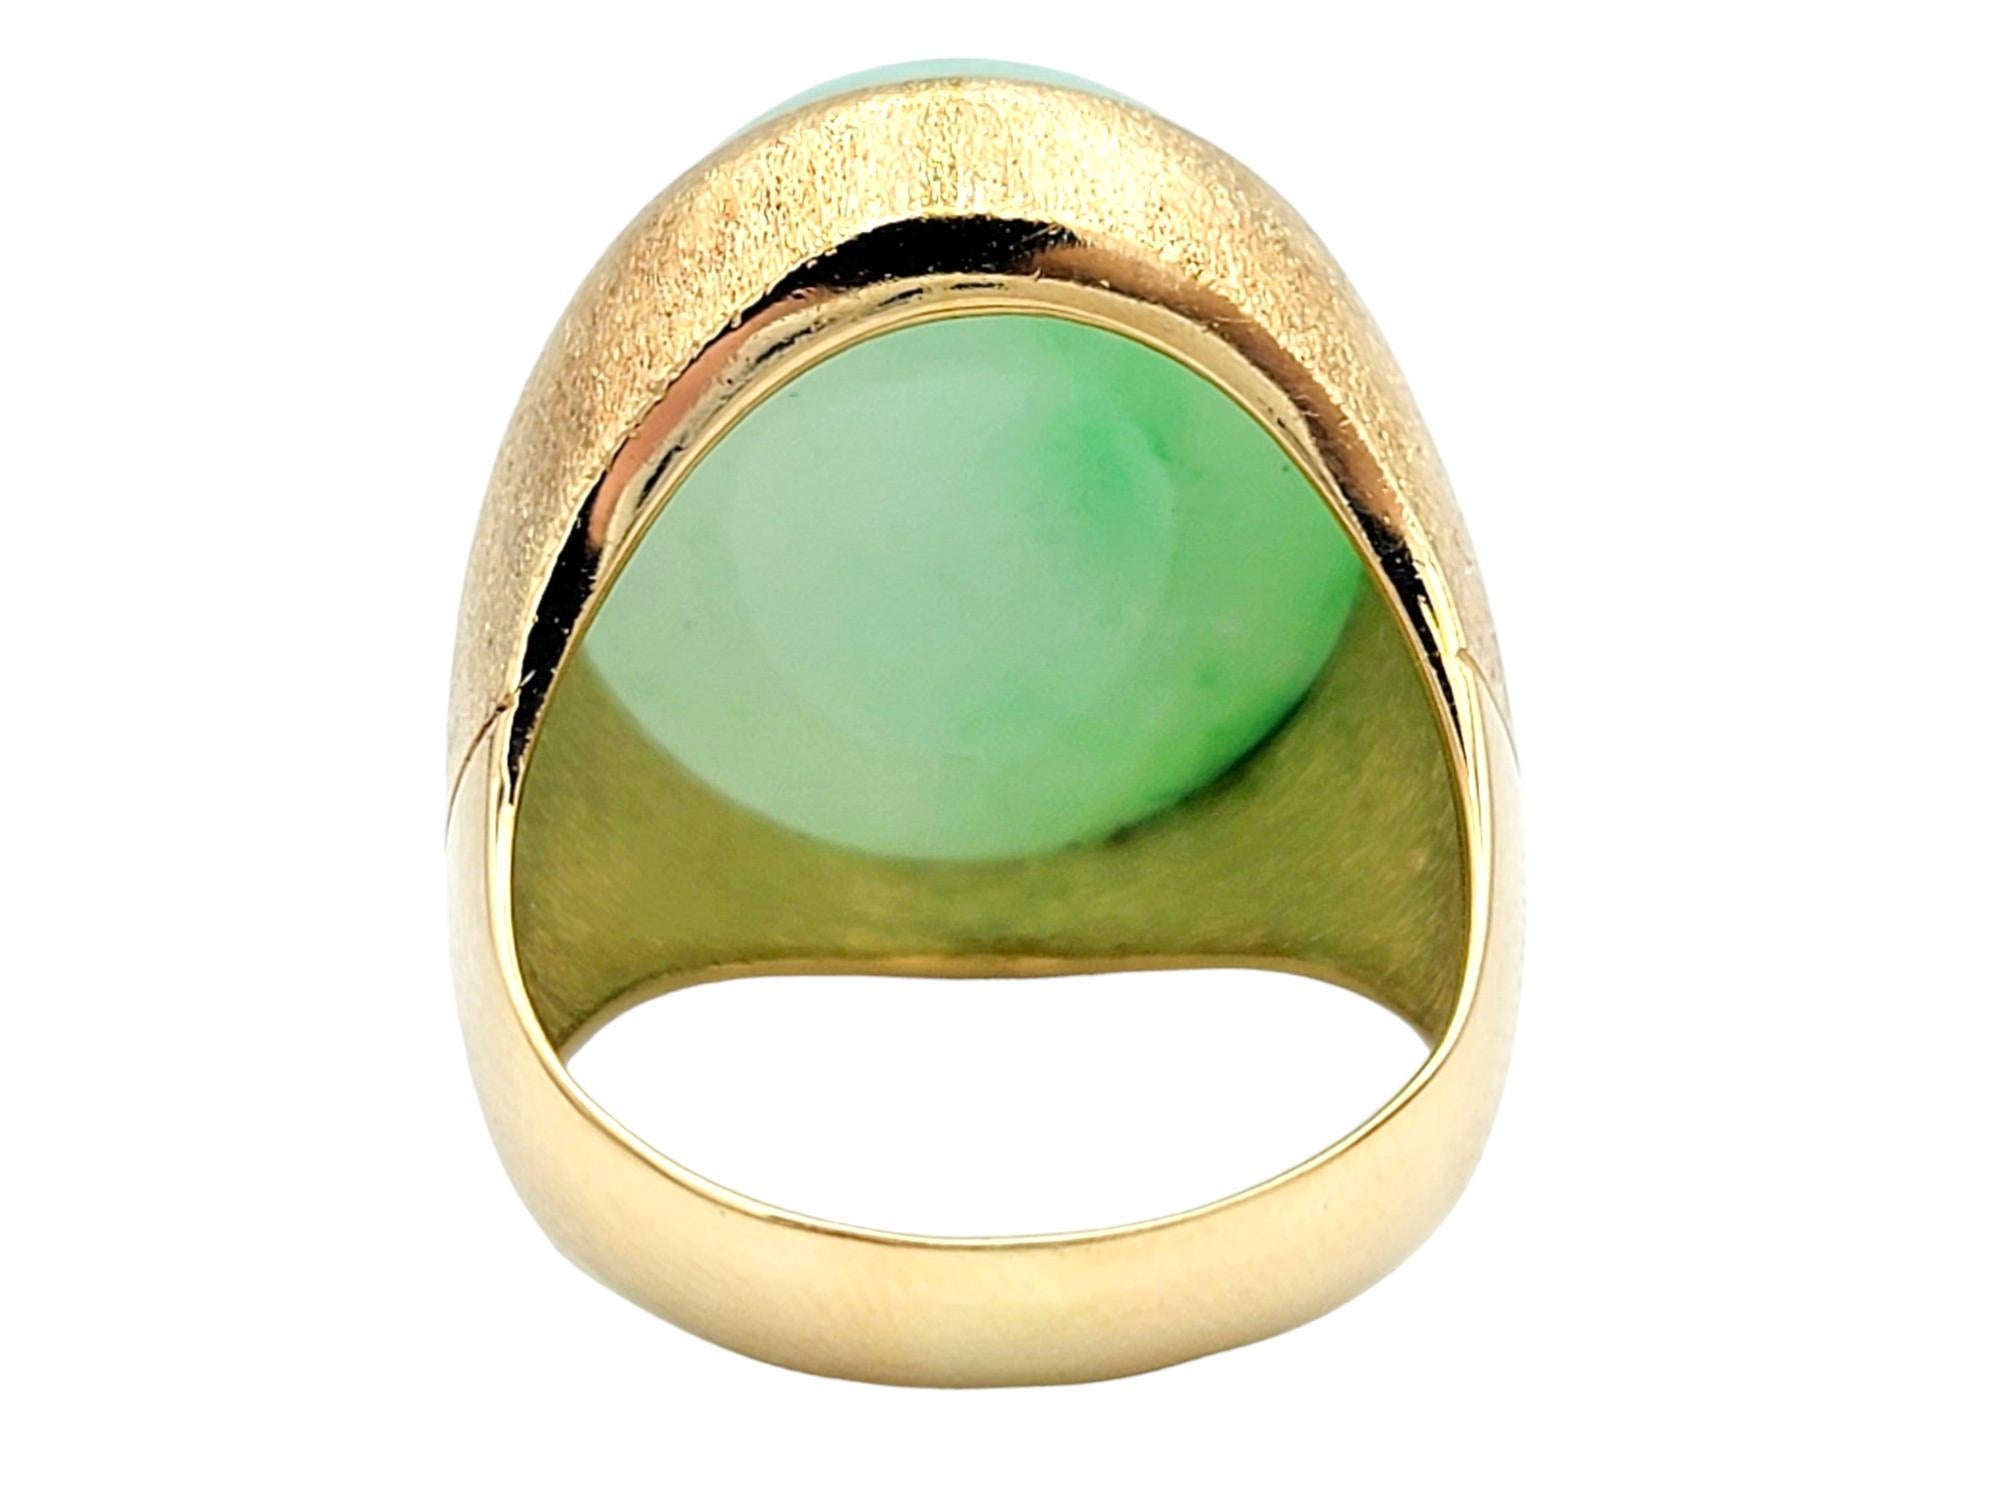 Women's or Men's 29.40 Carat Solitaire Oval Cabochon Green Nephrite Jade Ring in Yellow Gold For Sale